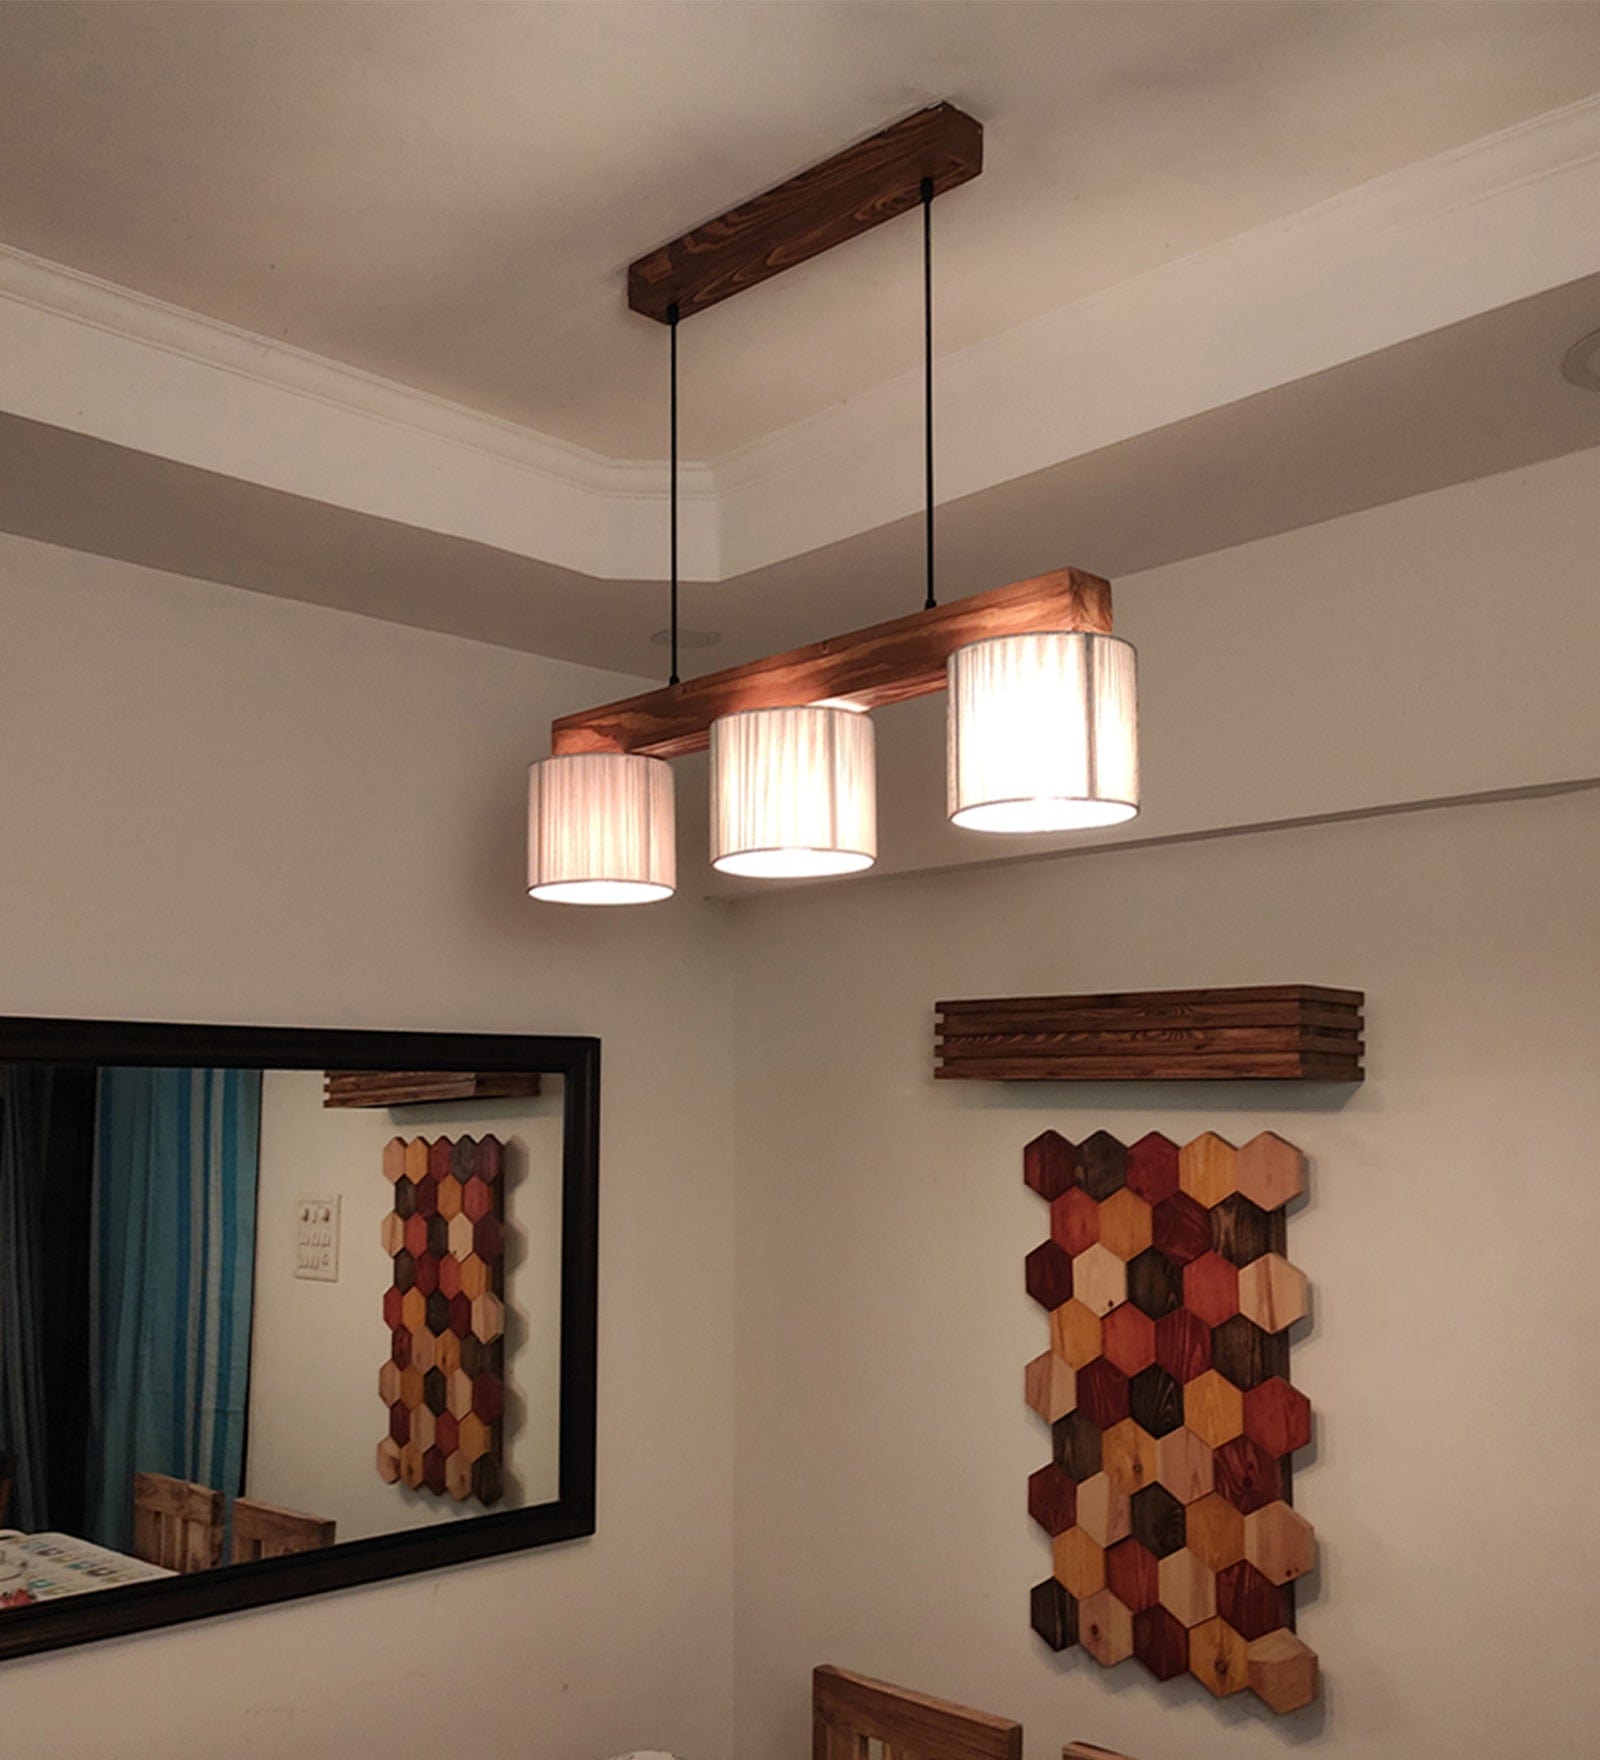 Tiga Brown Wooden Series Hanging Lamp with Silver Fabric Lampshades (BULB NOT INCLUDED)